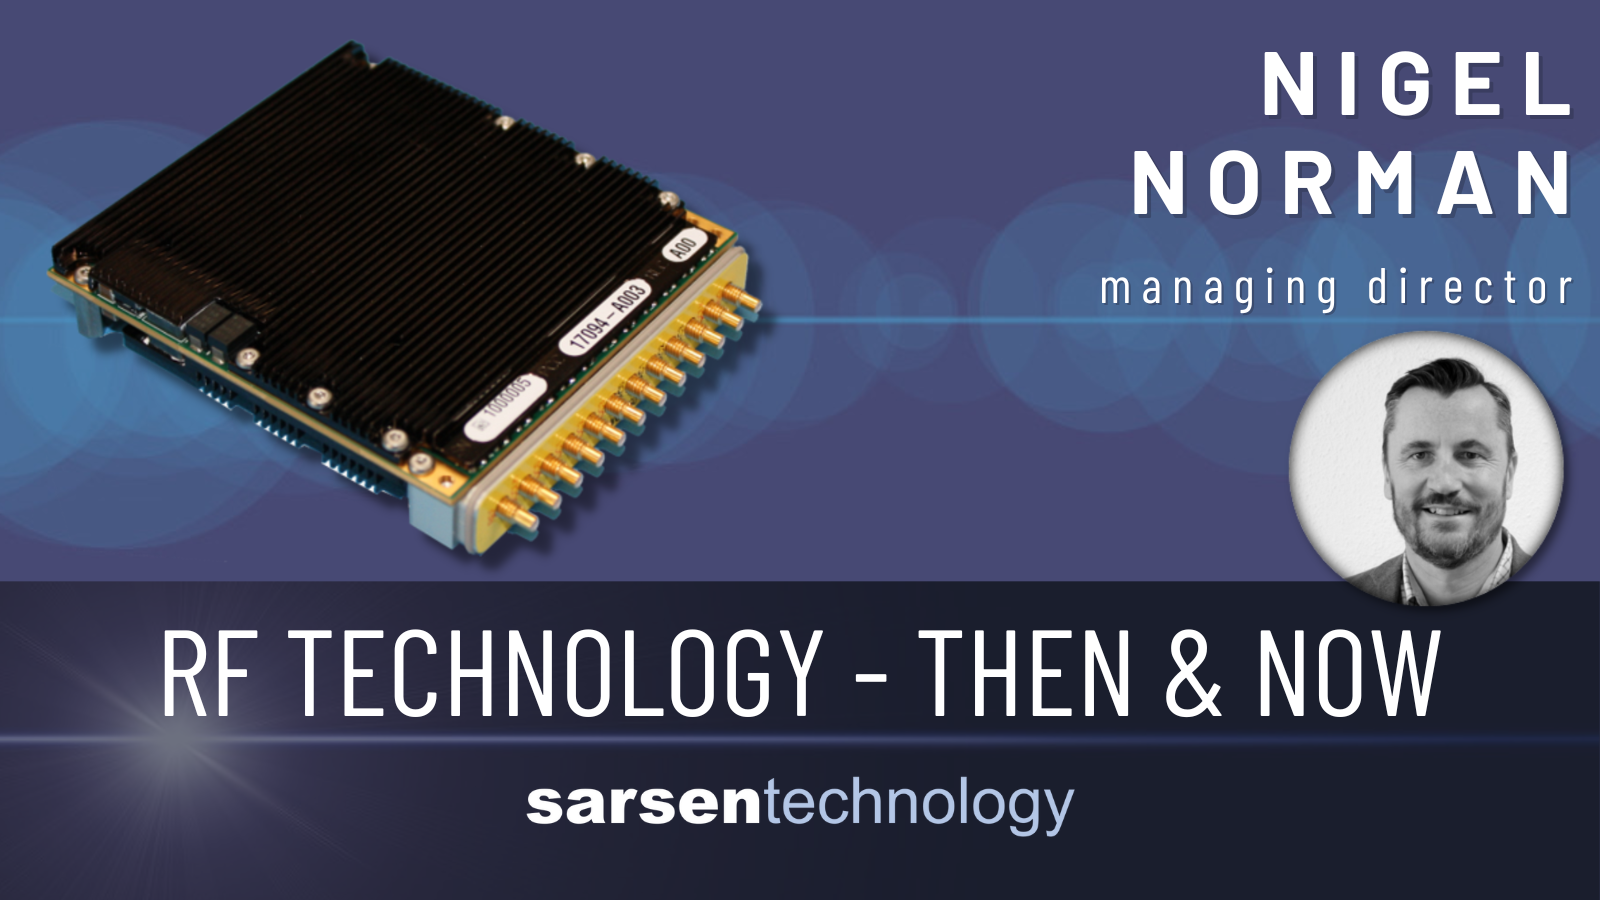 RF Technology: Then and Now - Written by Nigel Norman